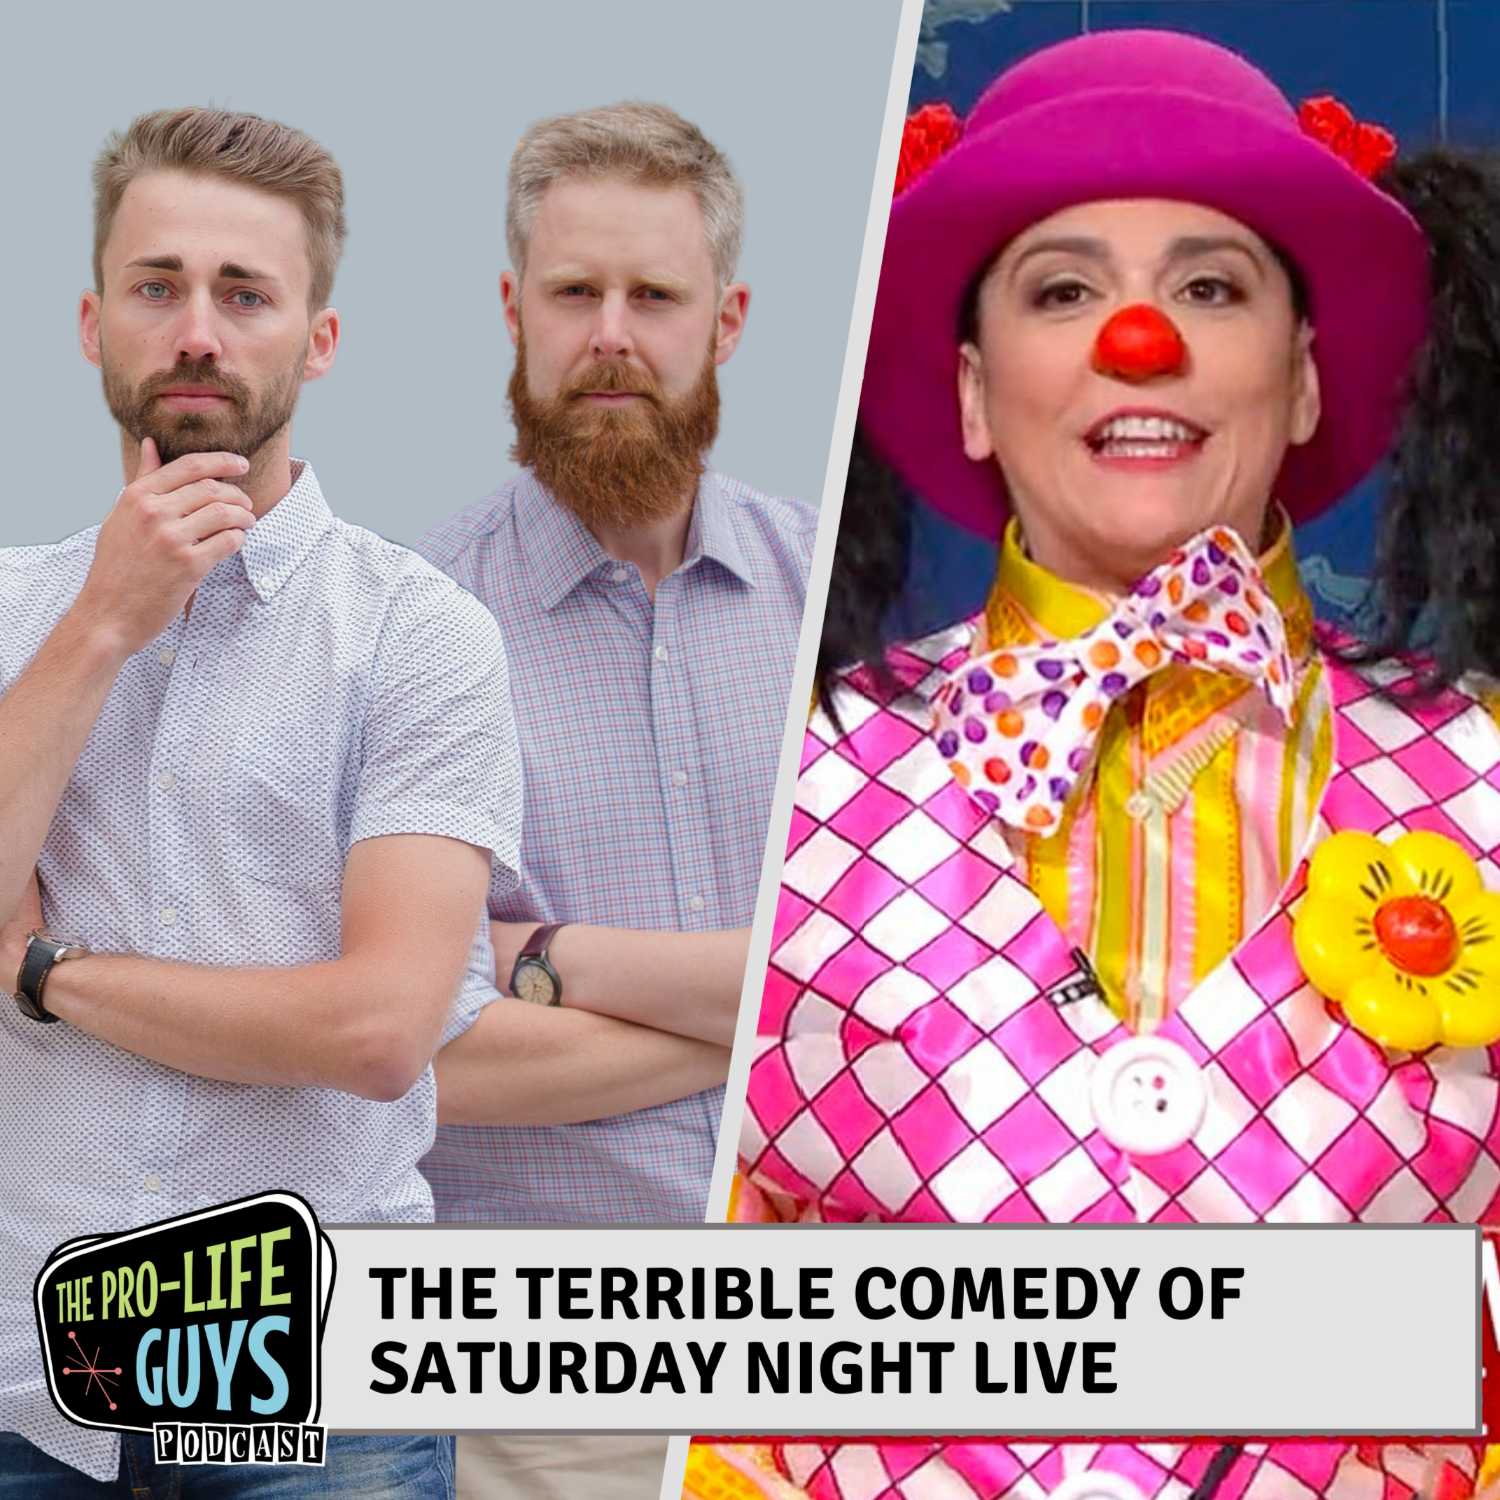 69: The Terrible Comedy of Saturday Night Live